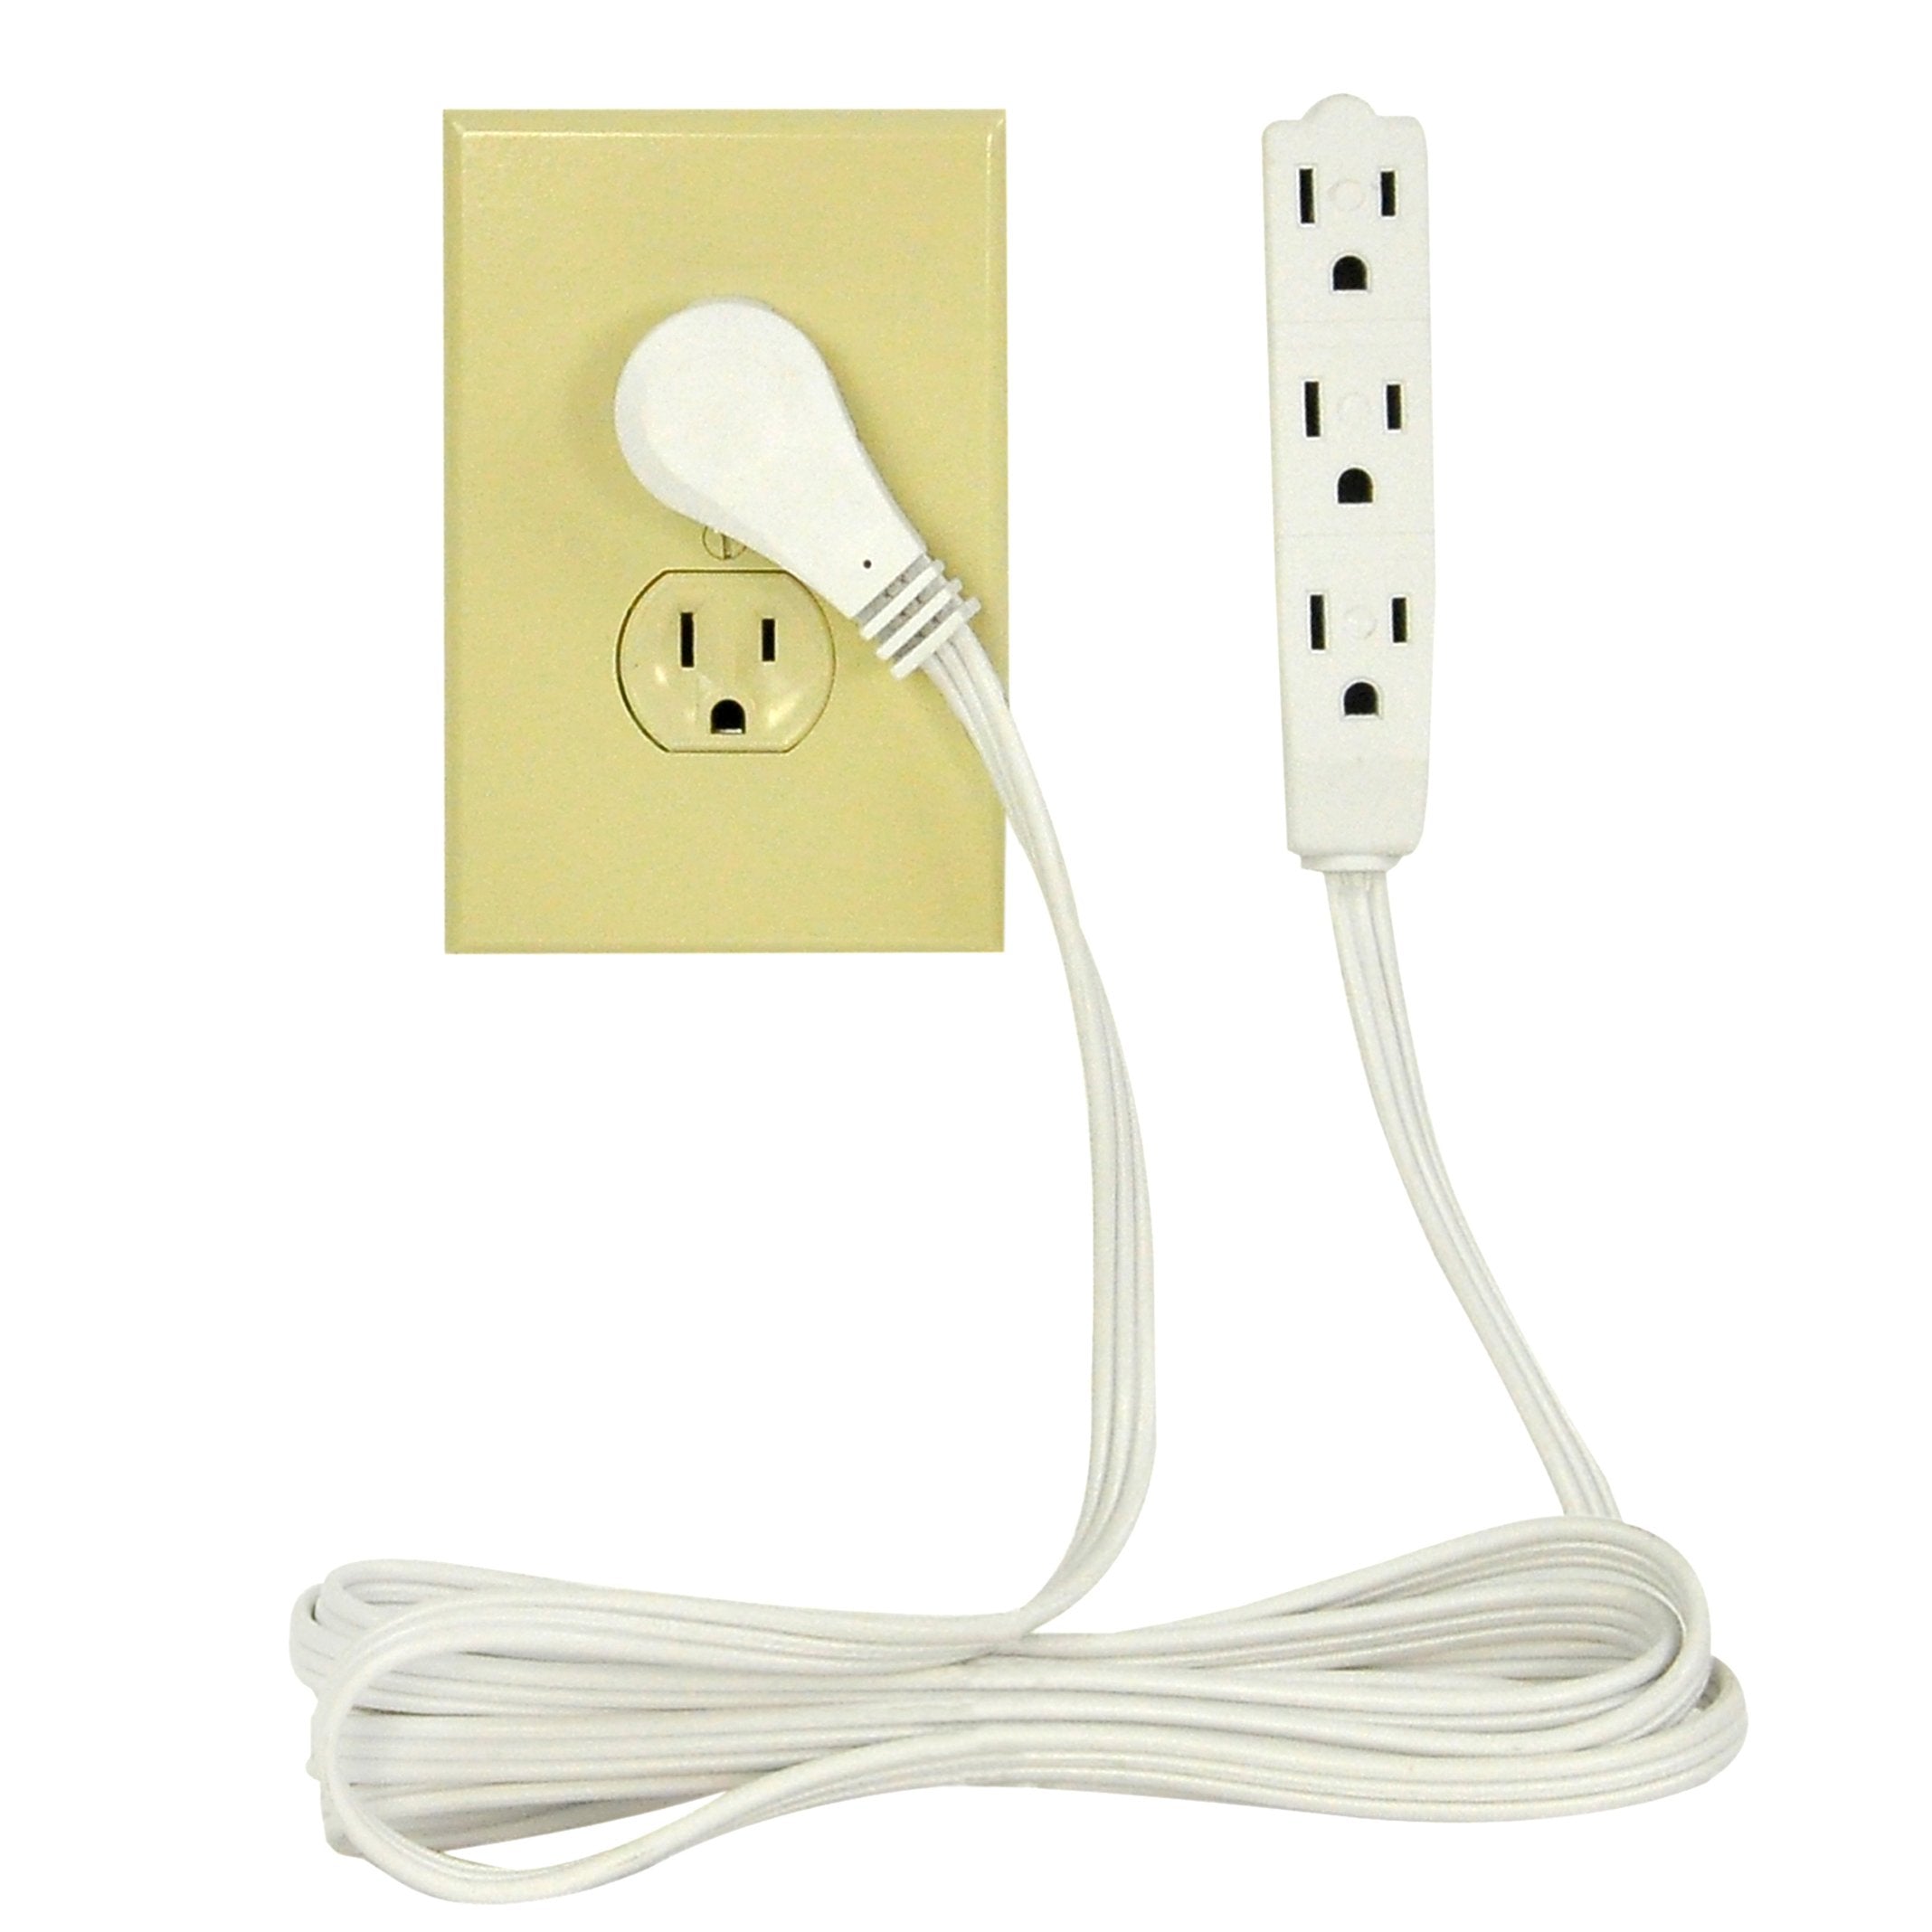 Flat Multiple Outlet Extension Cord for Indoor Use by Bindmaster- UL-Listed 3-Prong Multi Extension Wire- Space-Saving Flat Angled Extension Cord- White  - Acceptable